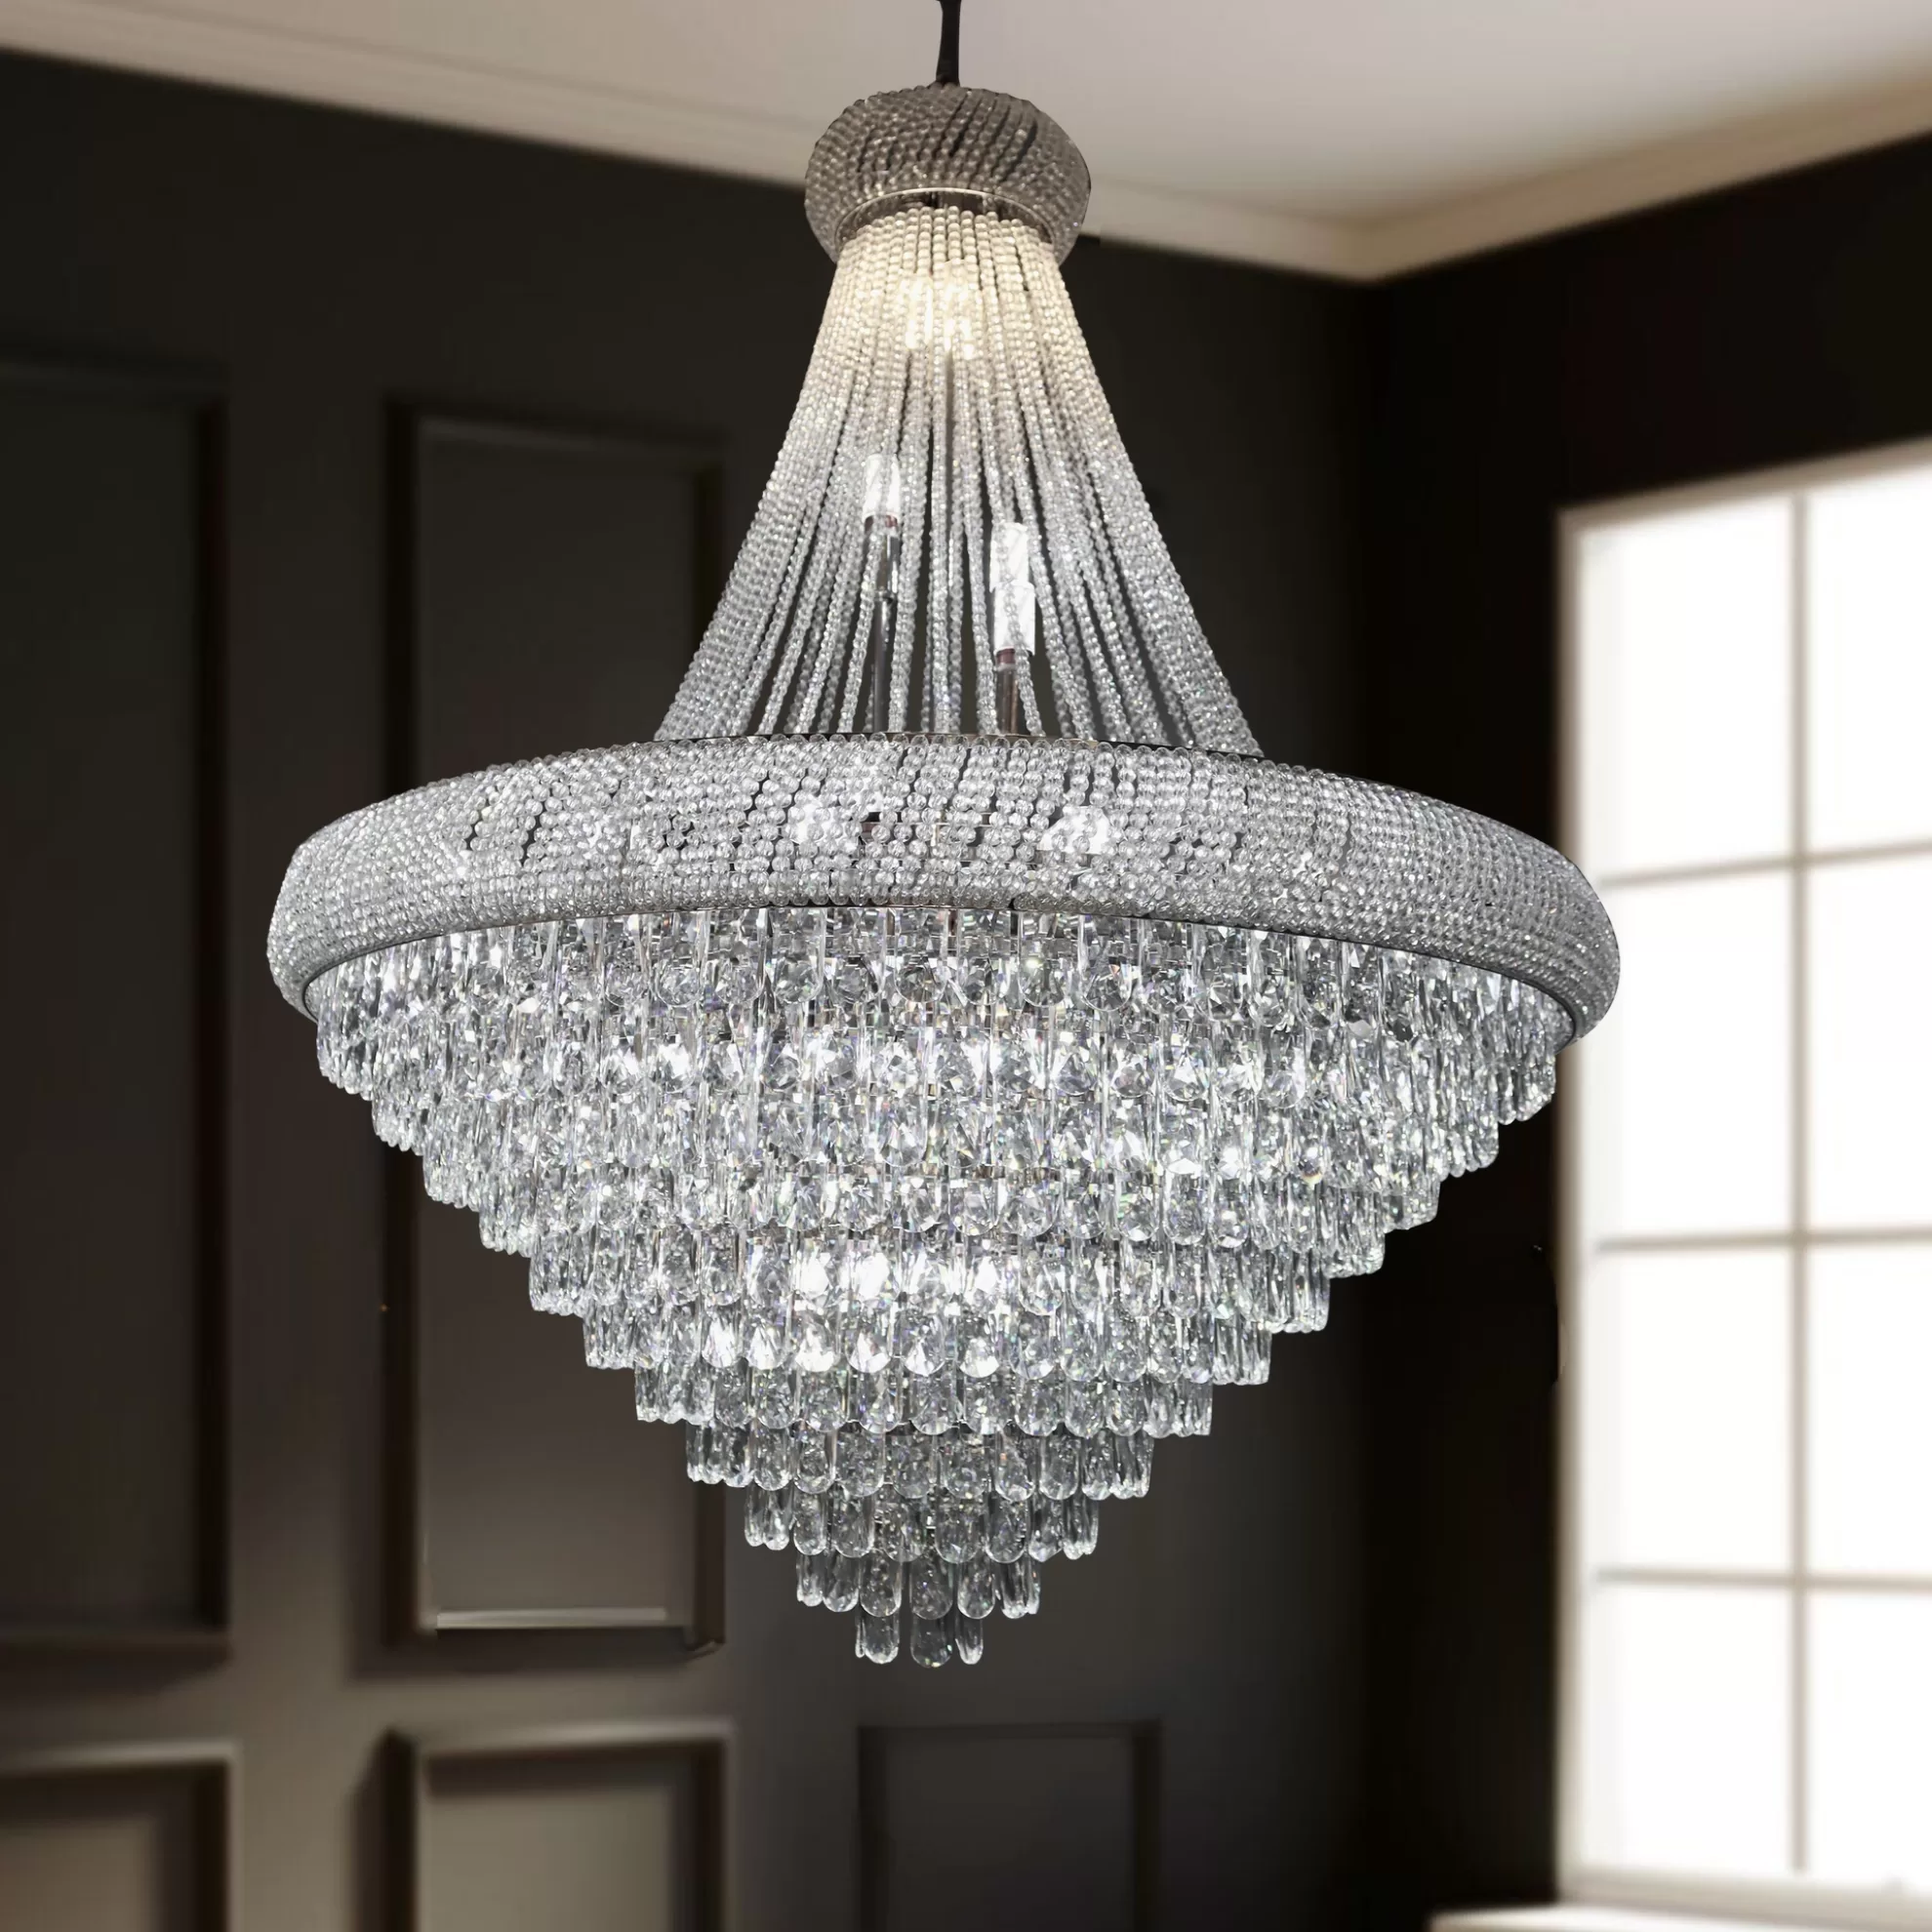 Large Classic Crystal Chandelier